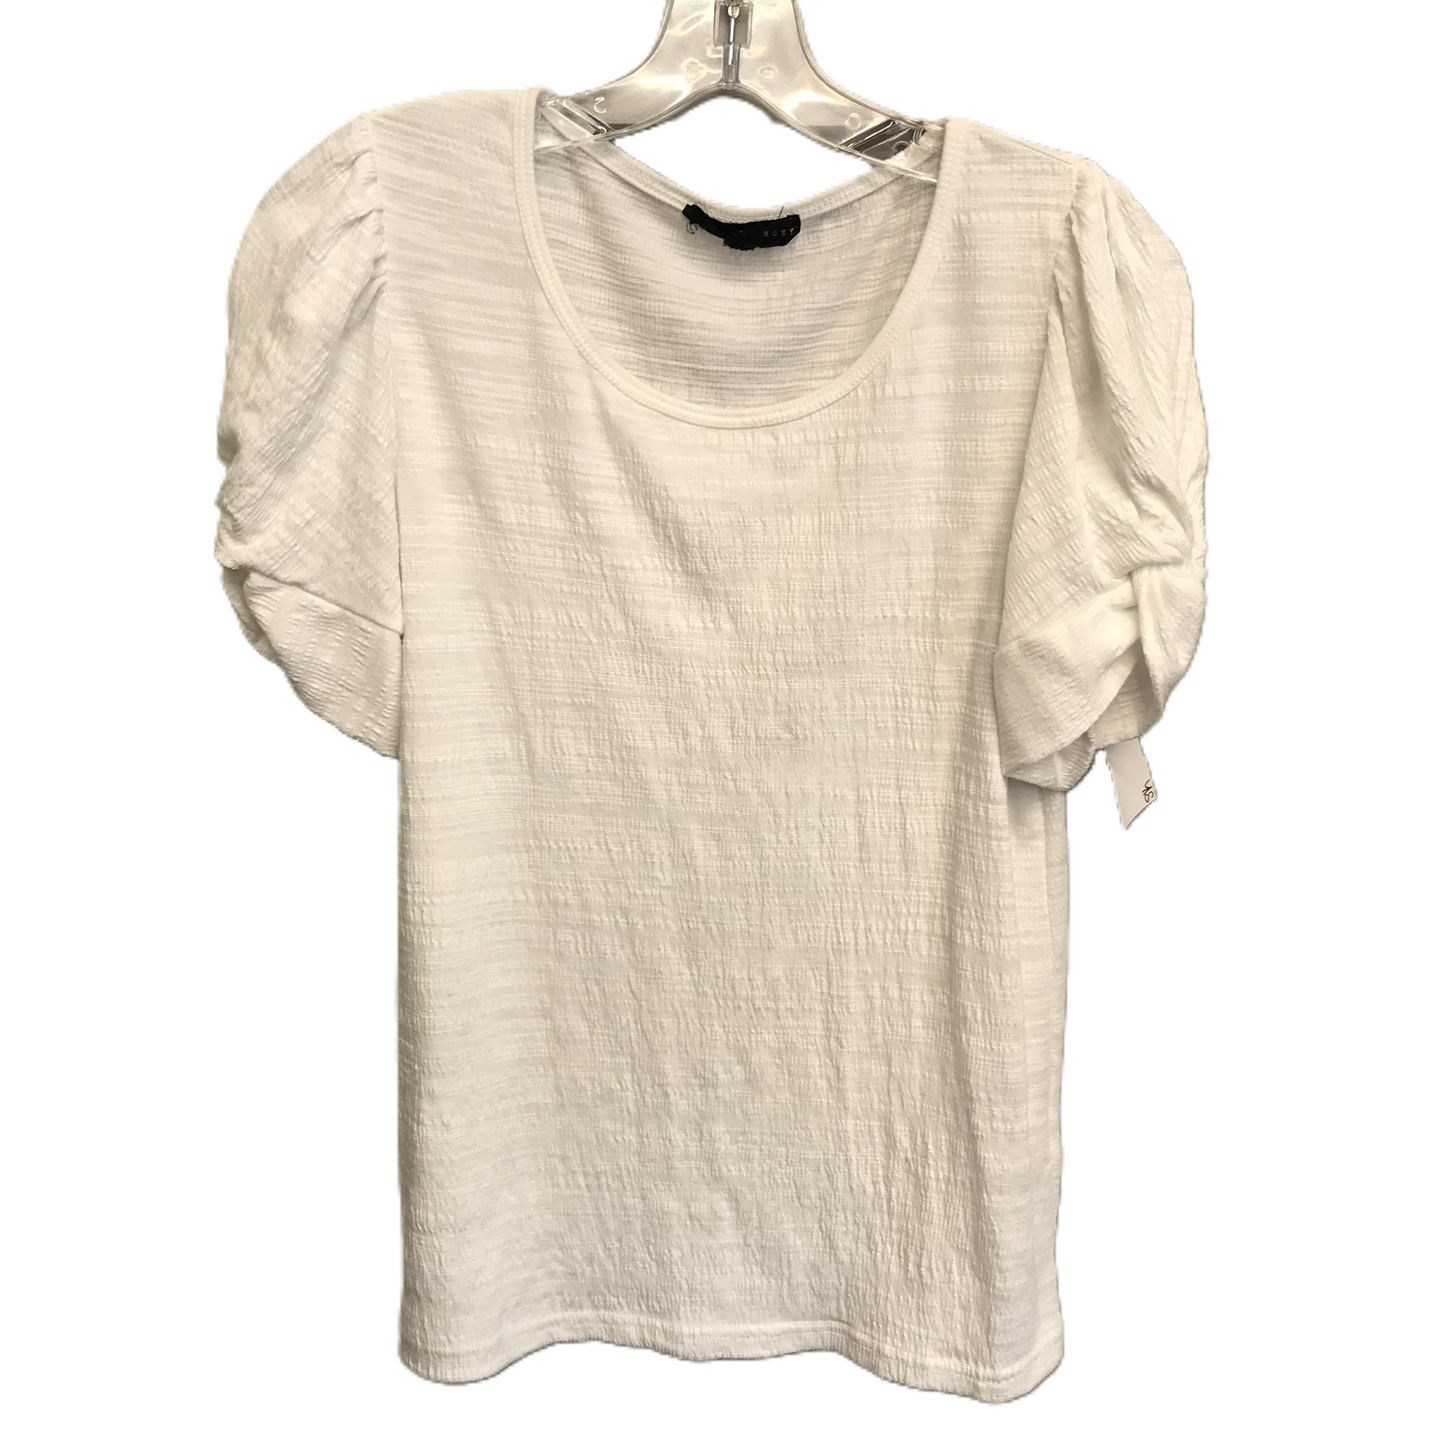 White Top Short Sleeve By Jane And Delancey, Size: S